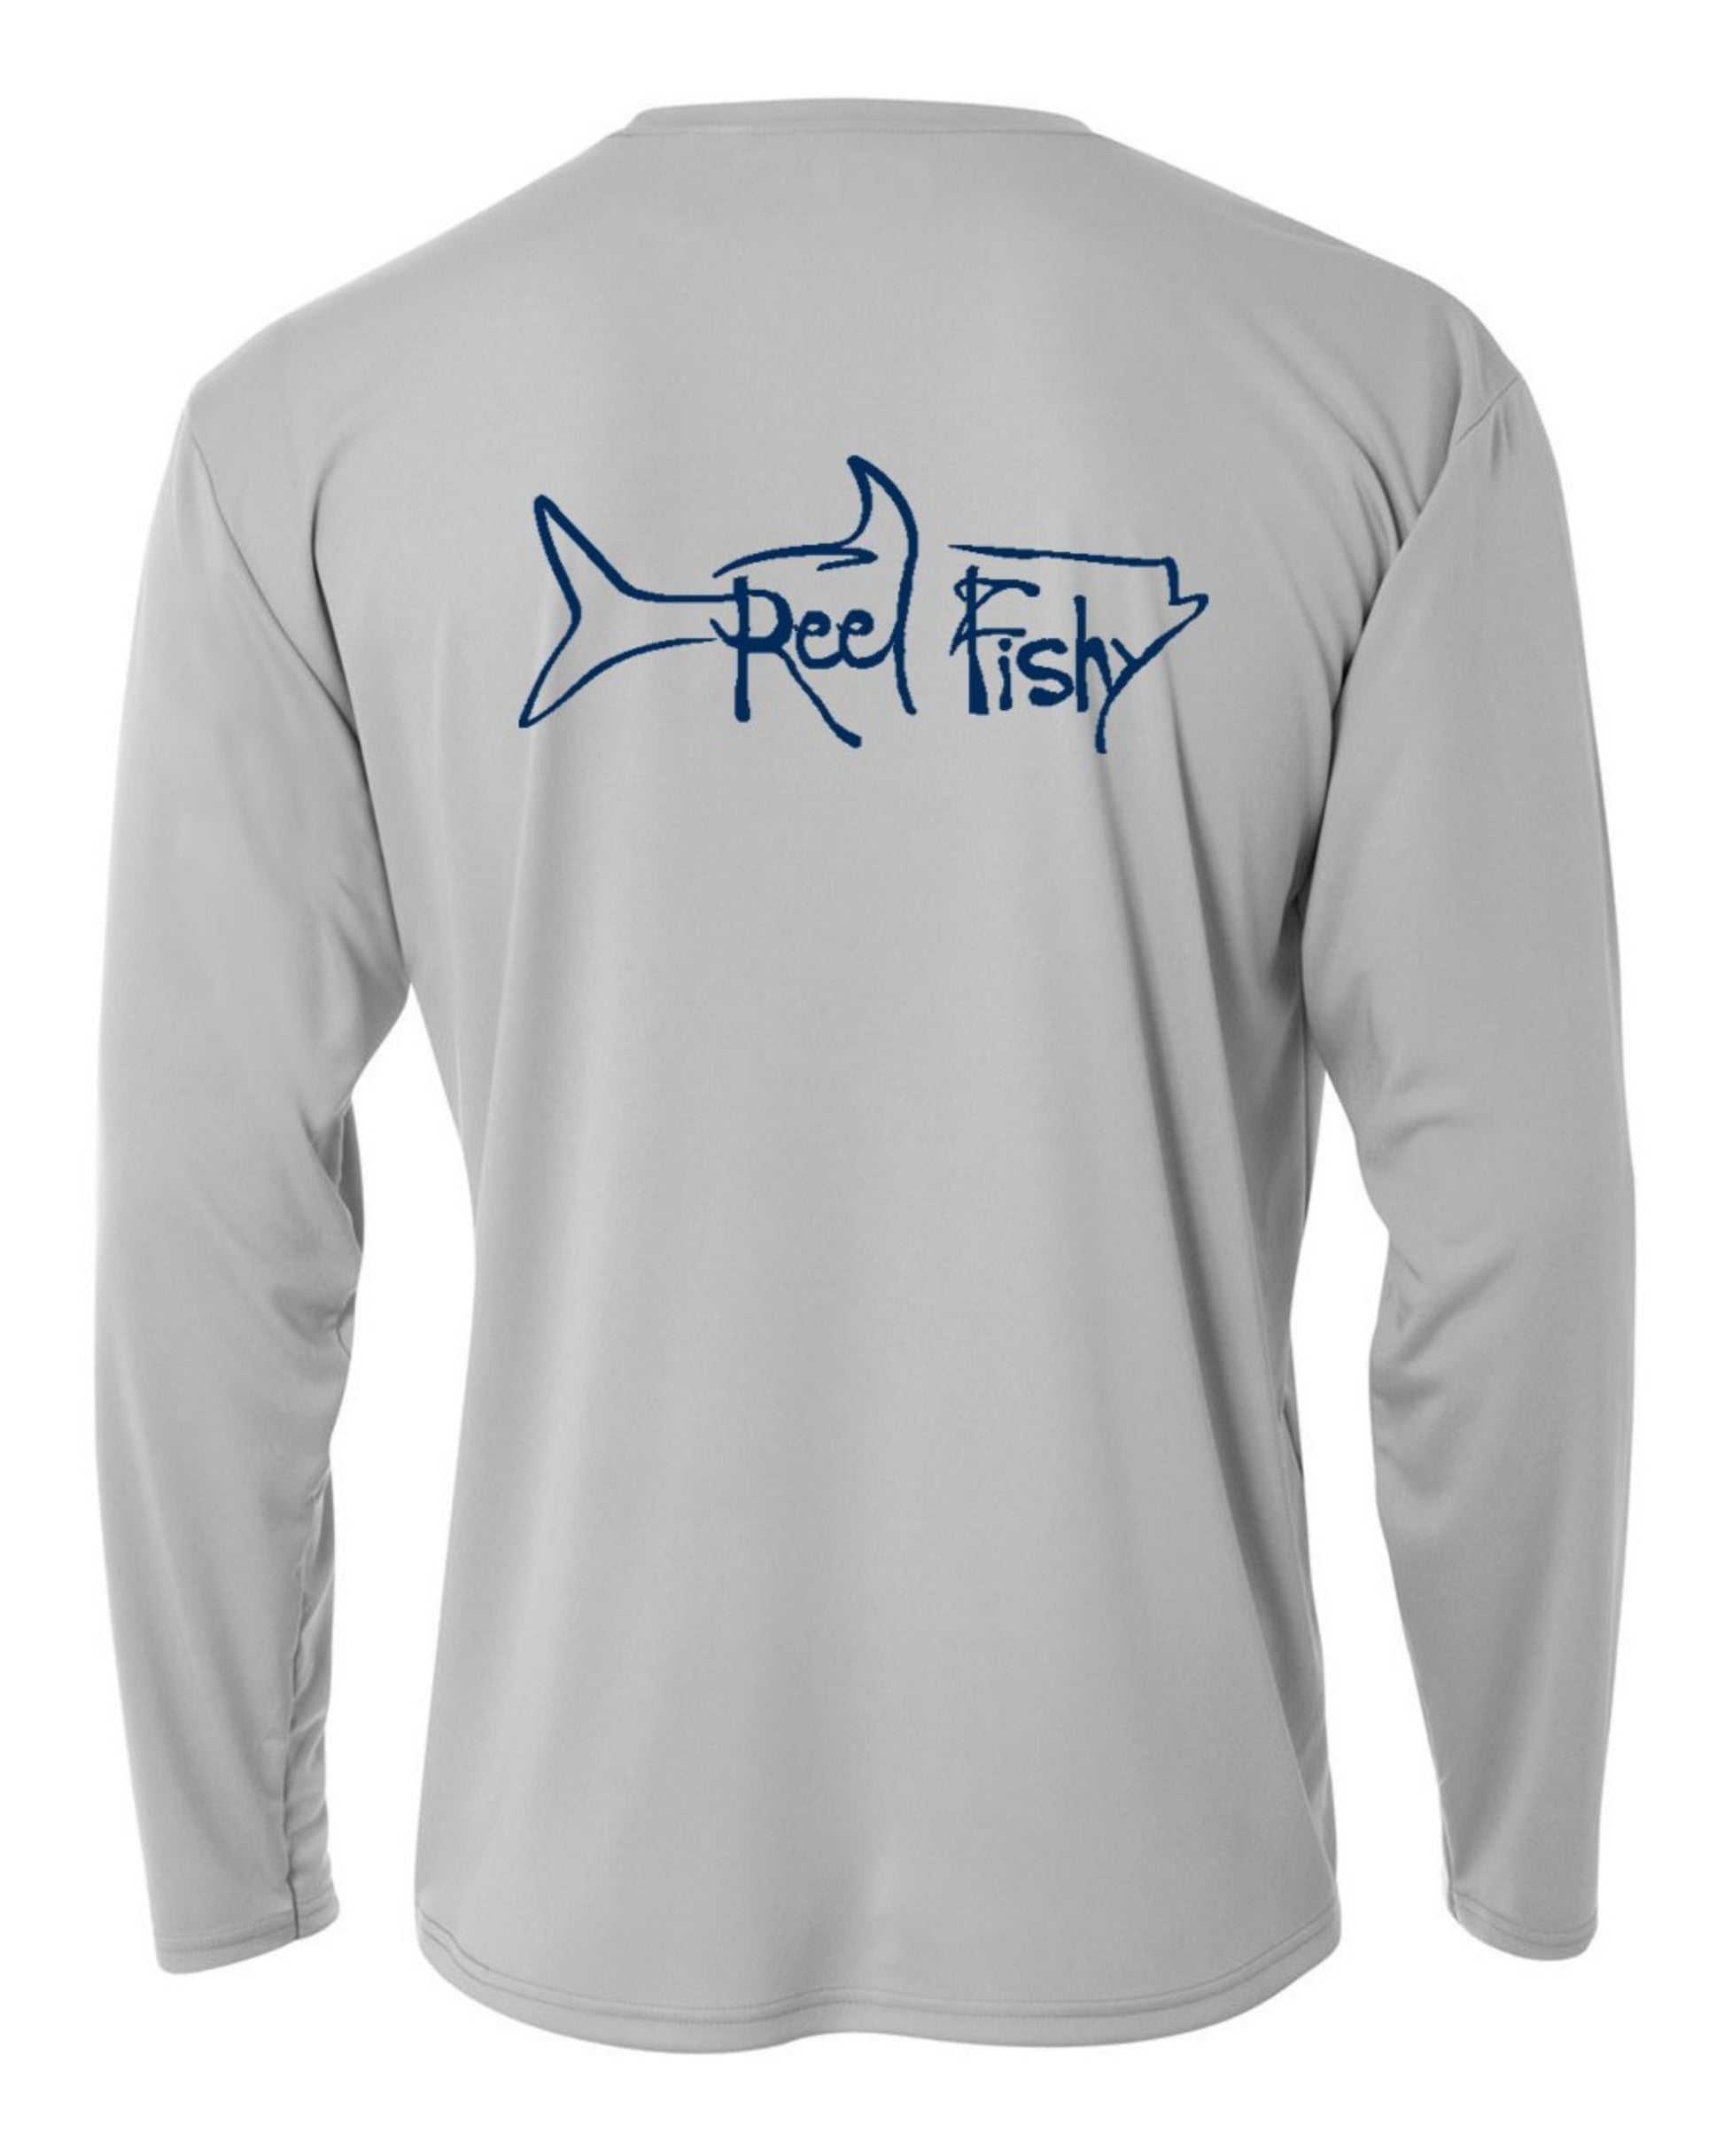 Youth Performance Dry-Fit Tarpon Fishing Shirts with Sun Protection by Reel Fishy Apparel - Long Sleeve Lt Gray